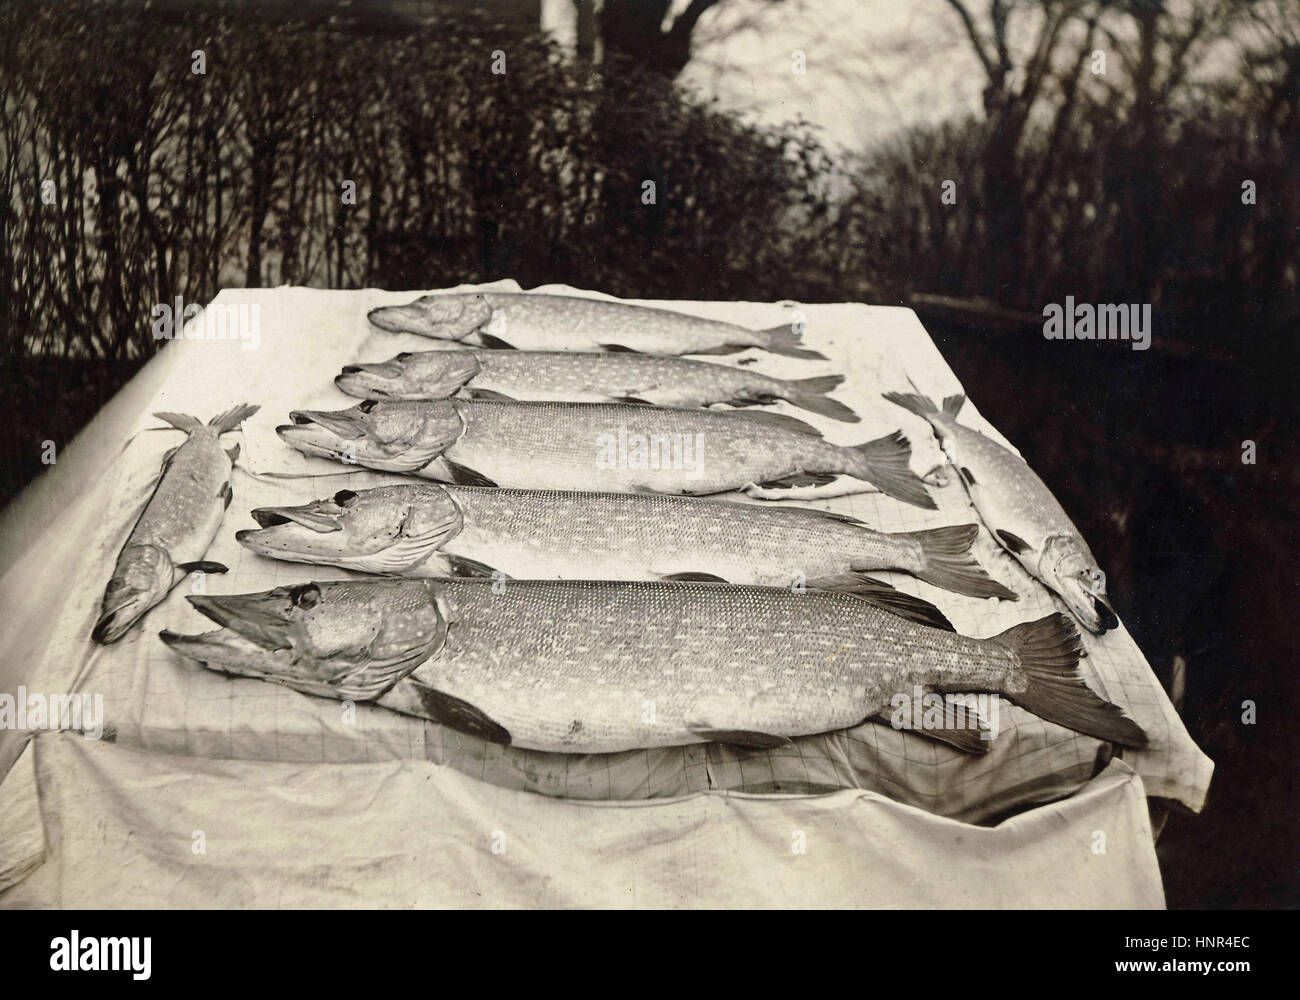 Archive image - 1920s study of a haul of Pike fish Stock Photo